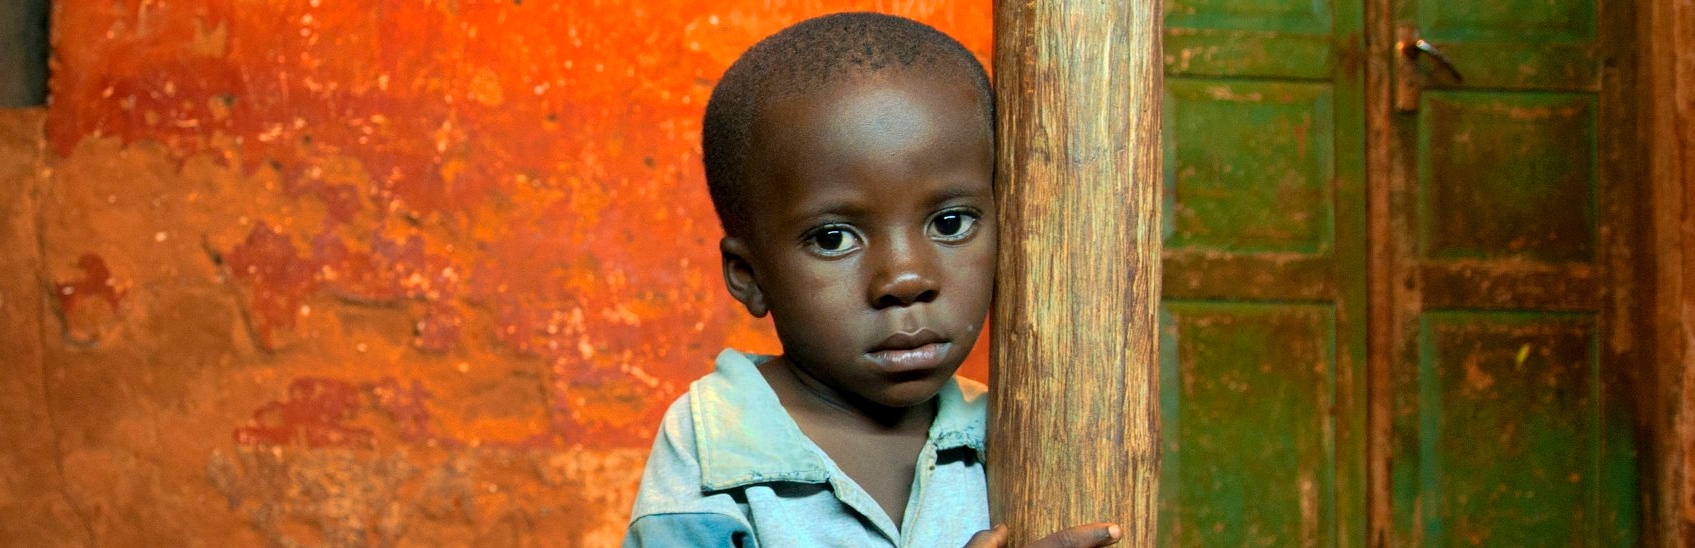 Portrait of a young pre-school boy, age three, in Tanzania. This young child grandmother hopes he will one day be able to attend school and break the cycle of poverty in which he’s grown up. Photo Credit: Colin Crowley/Save the Children, December 2010.